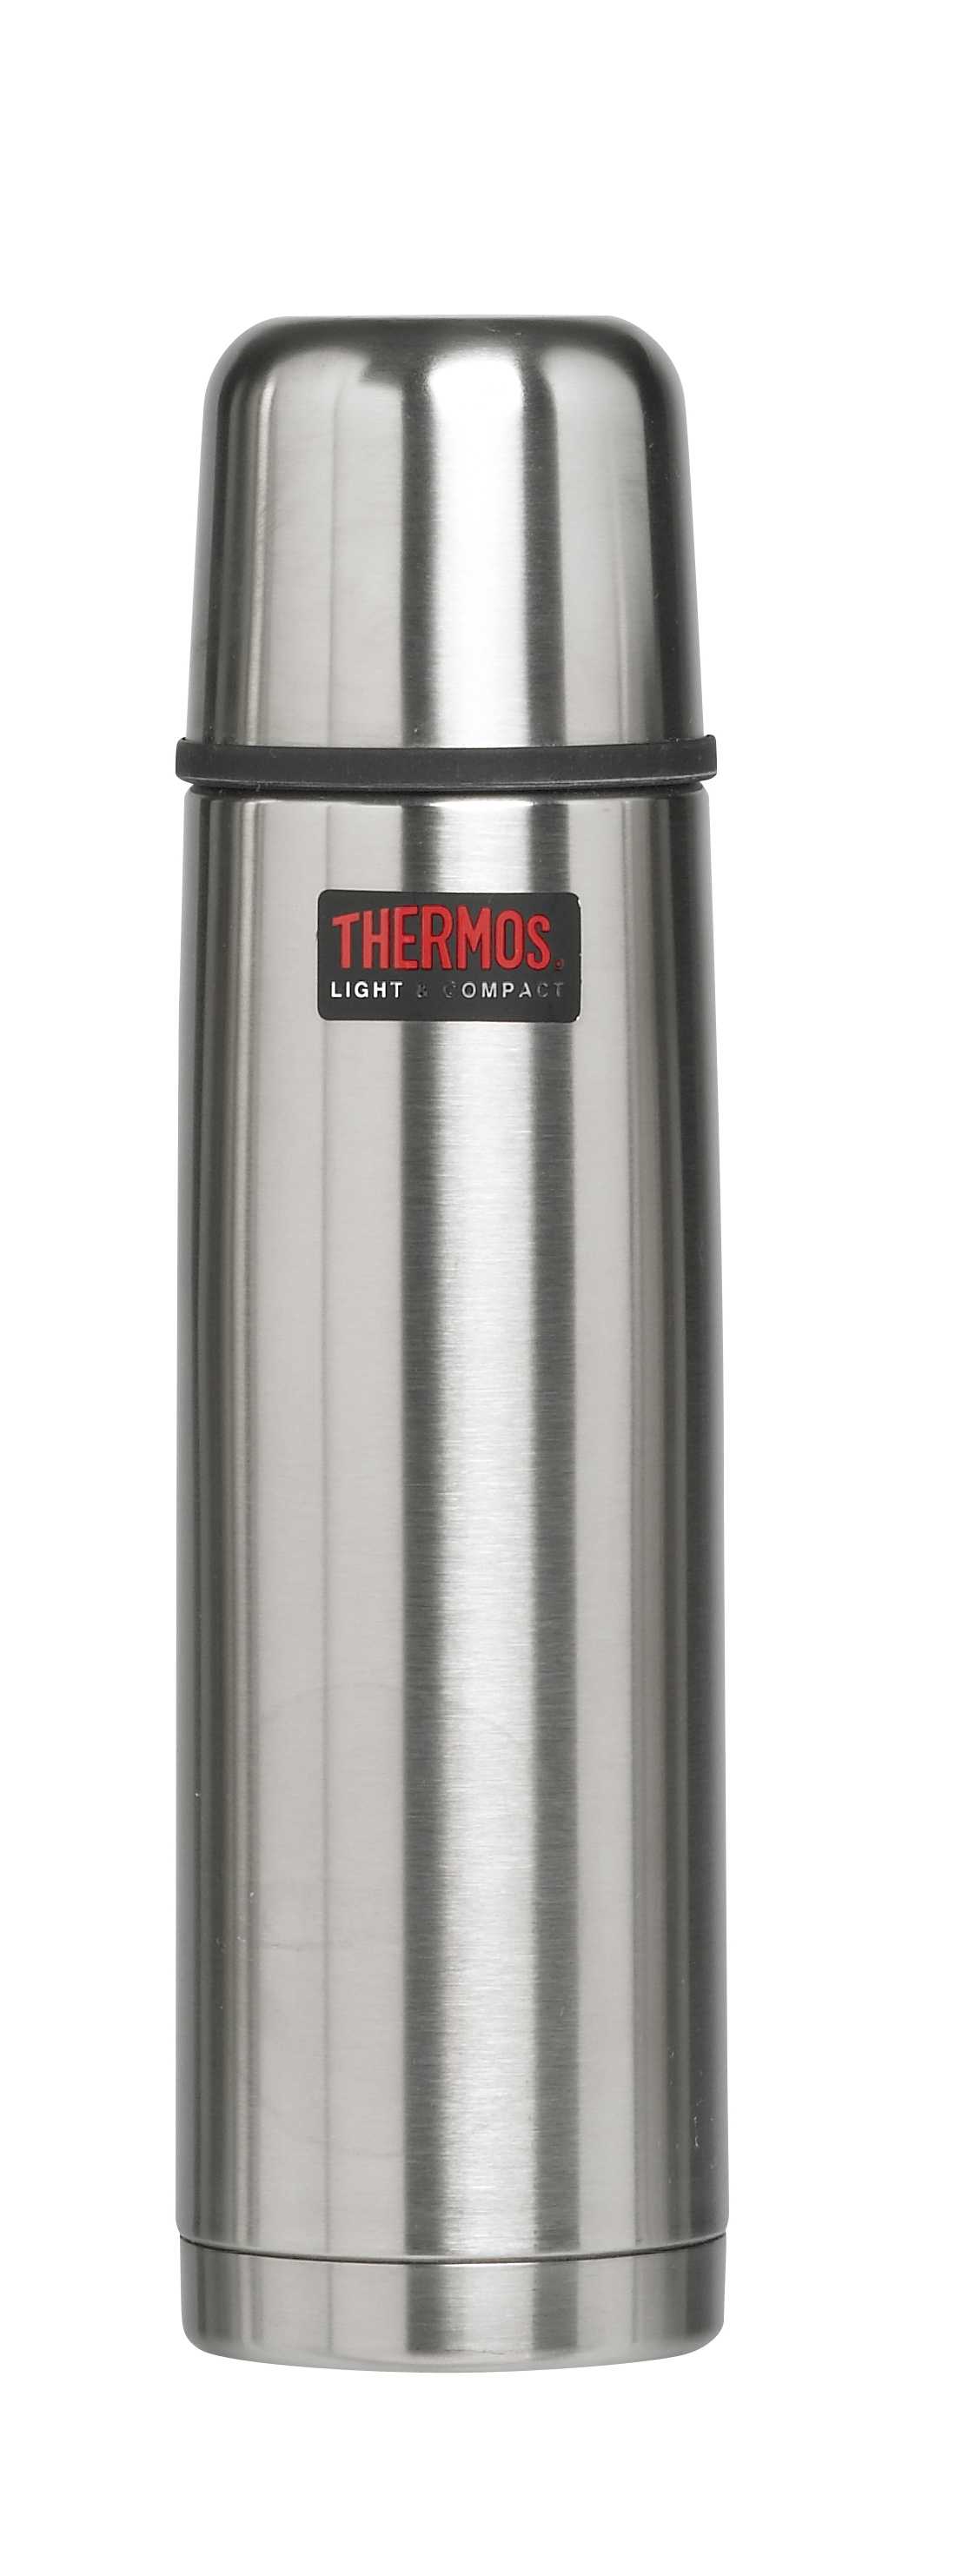 Thermos Isolierflasche Light & Compact 0,5 L, edelstahl